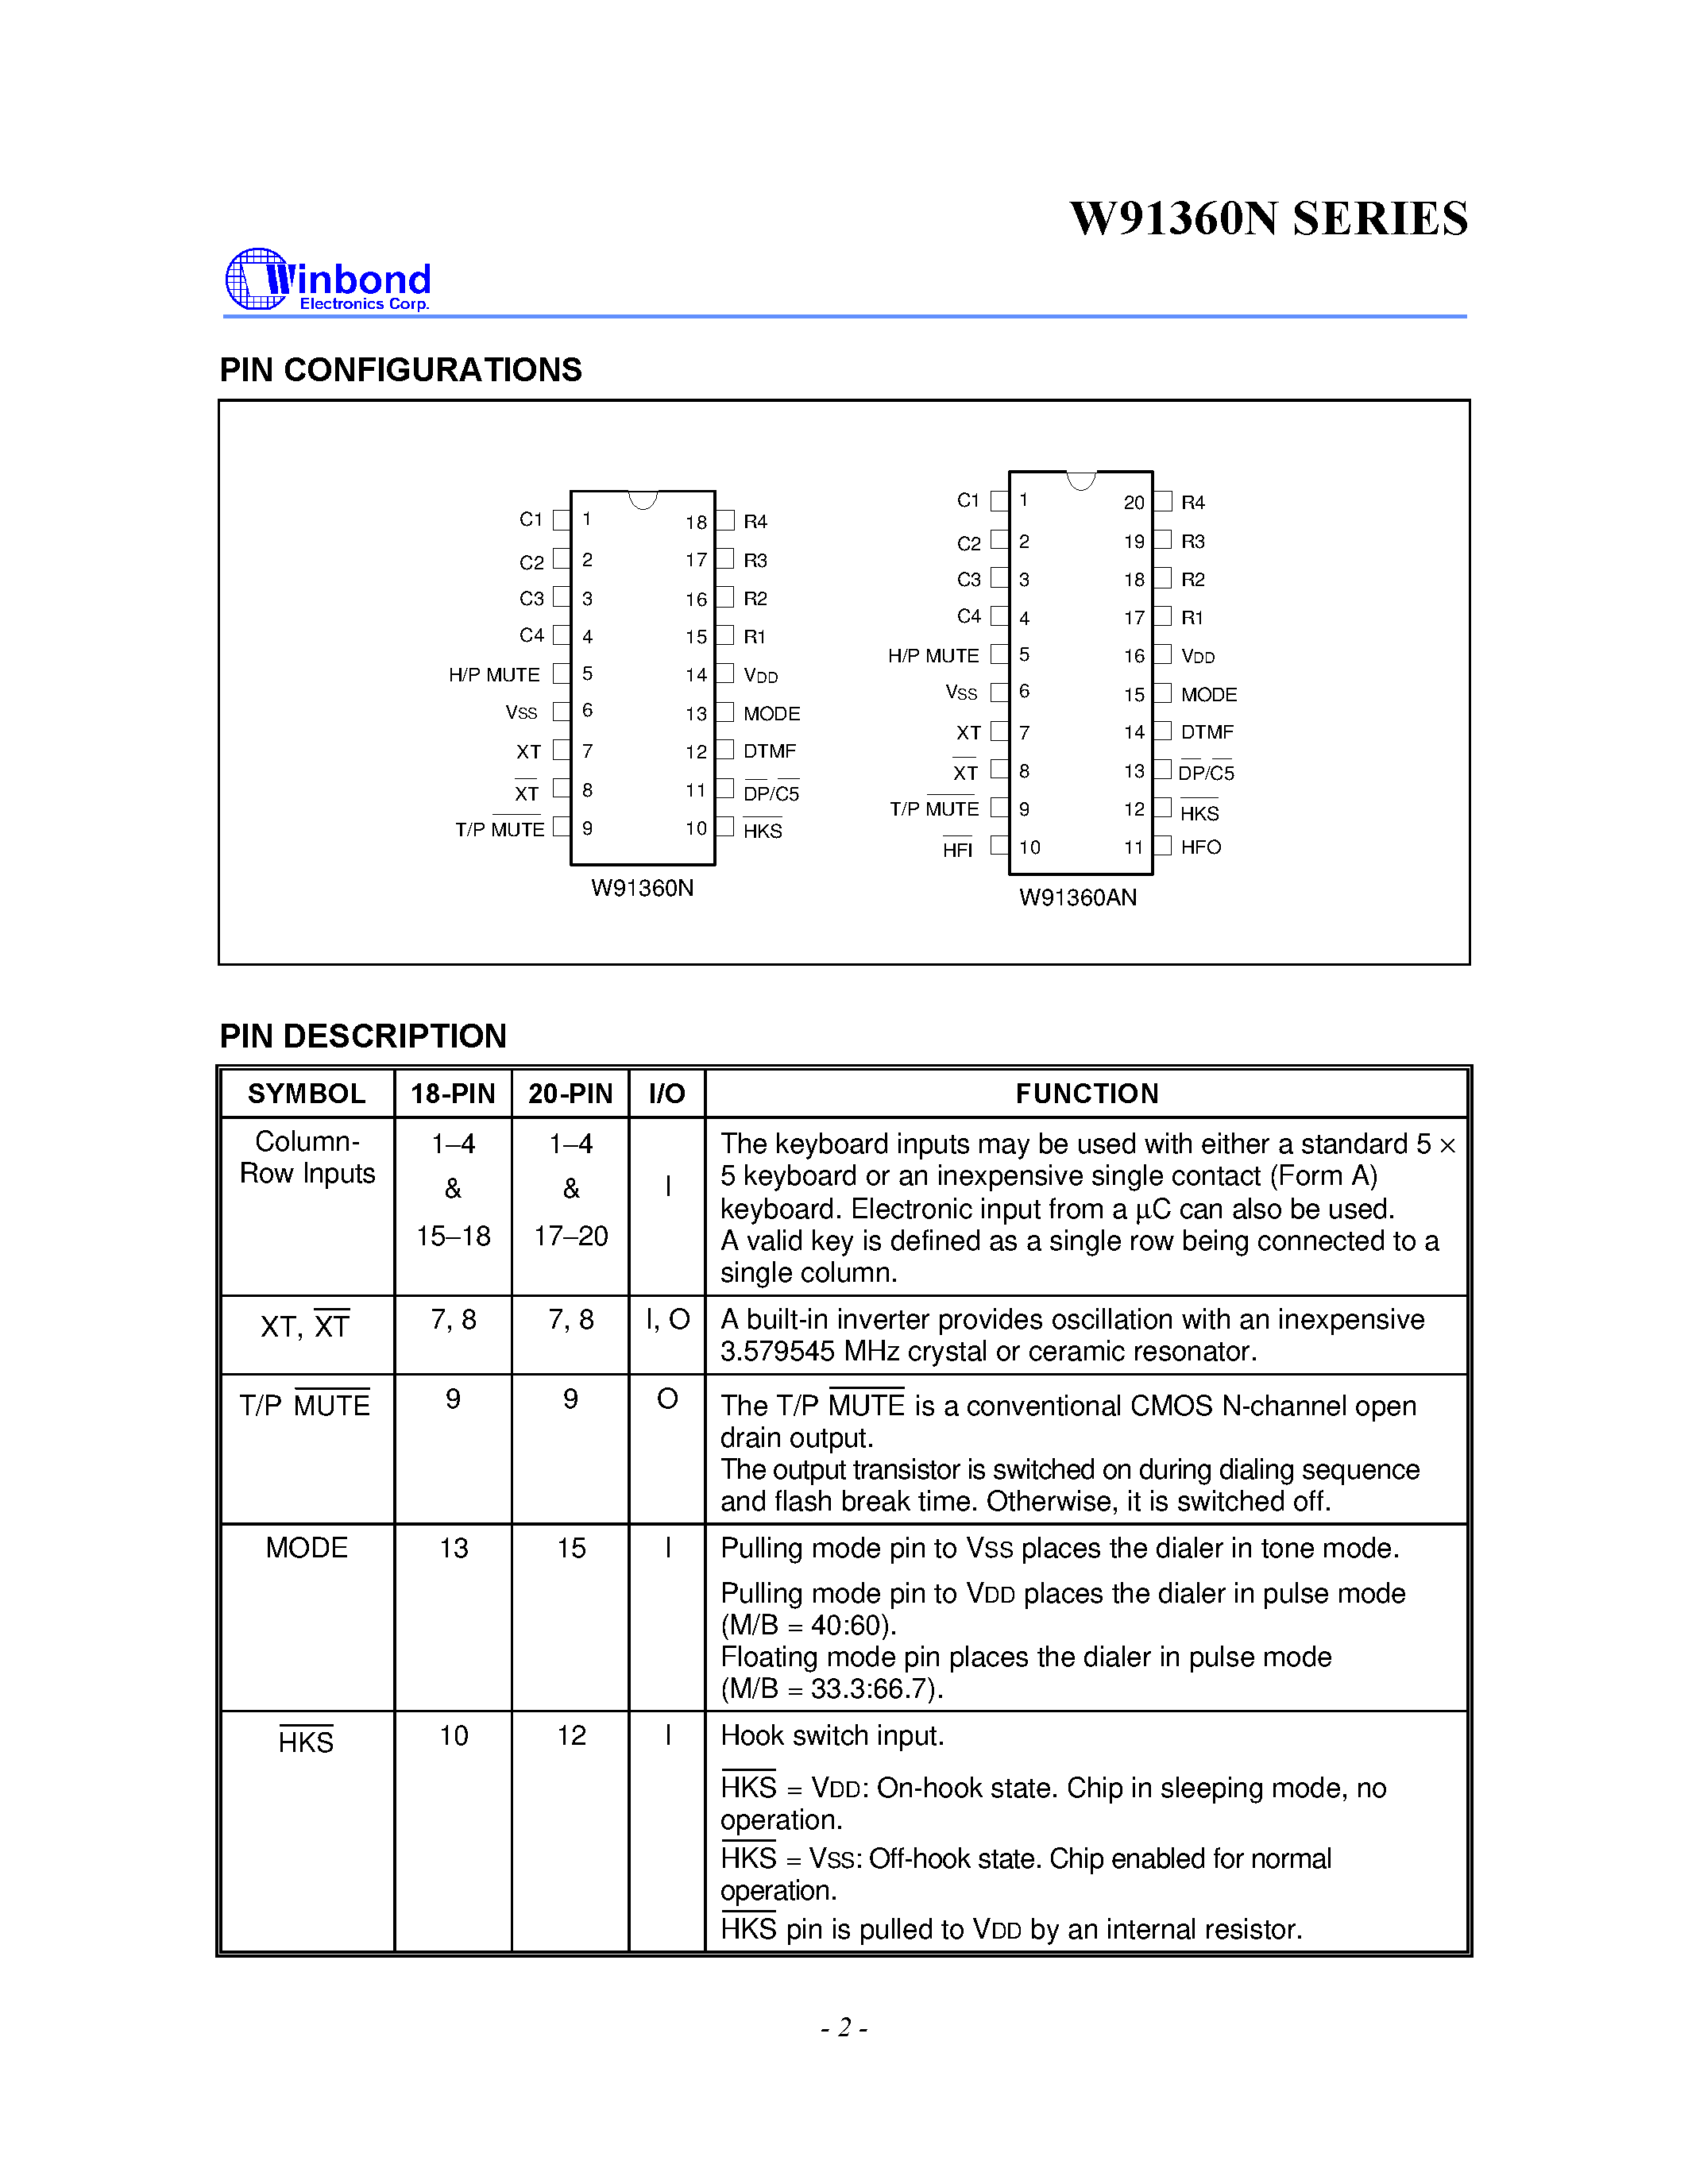 Datasheet W91360N - 3-MEMORY TONE/PULSE DIALER WITH HANDFREE AND HOLD FUNCTION page 2